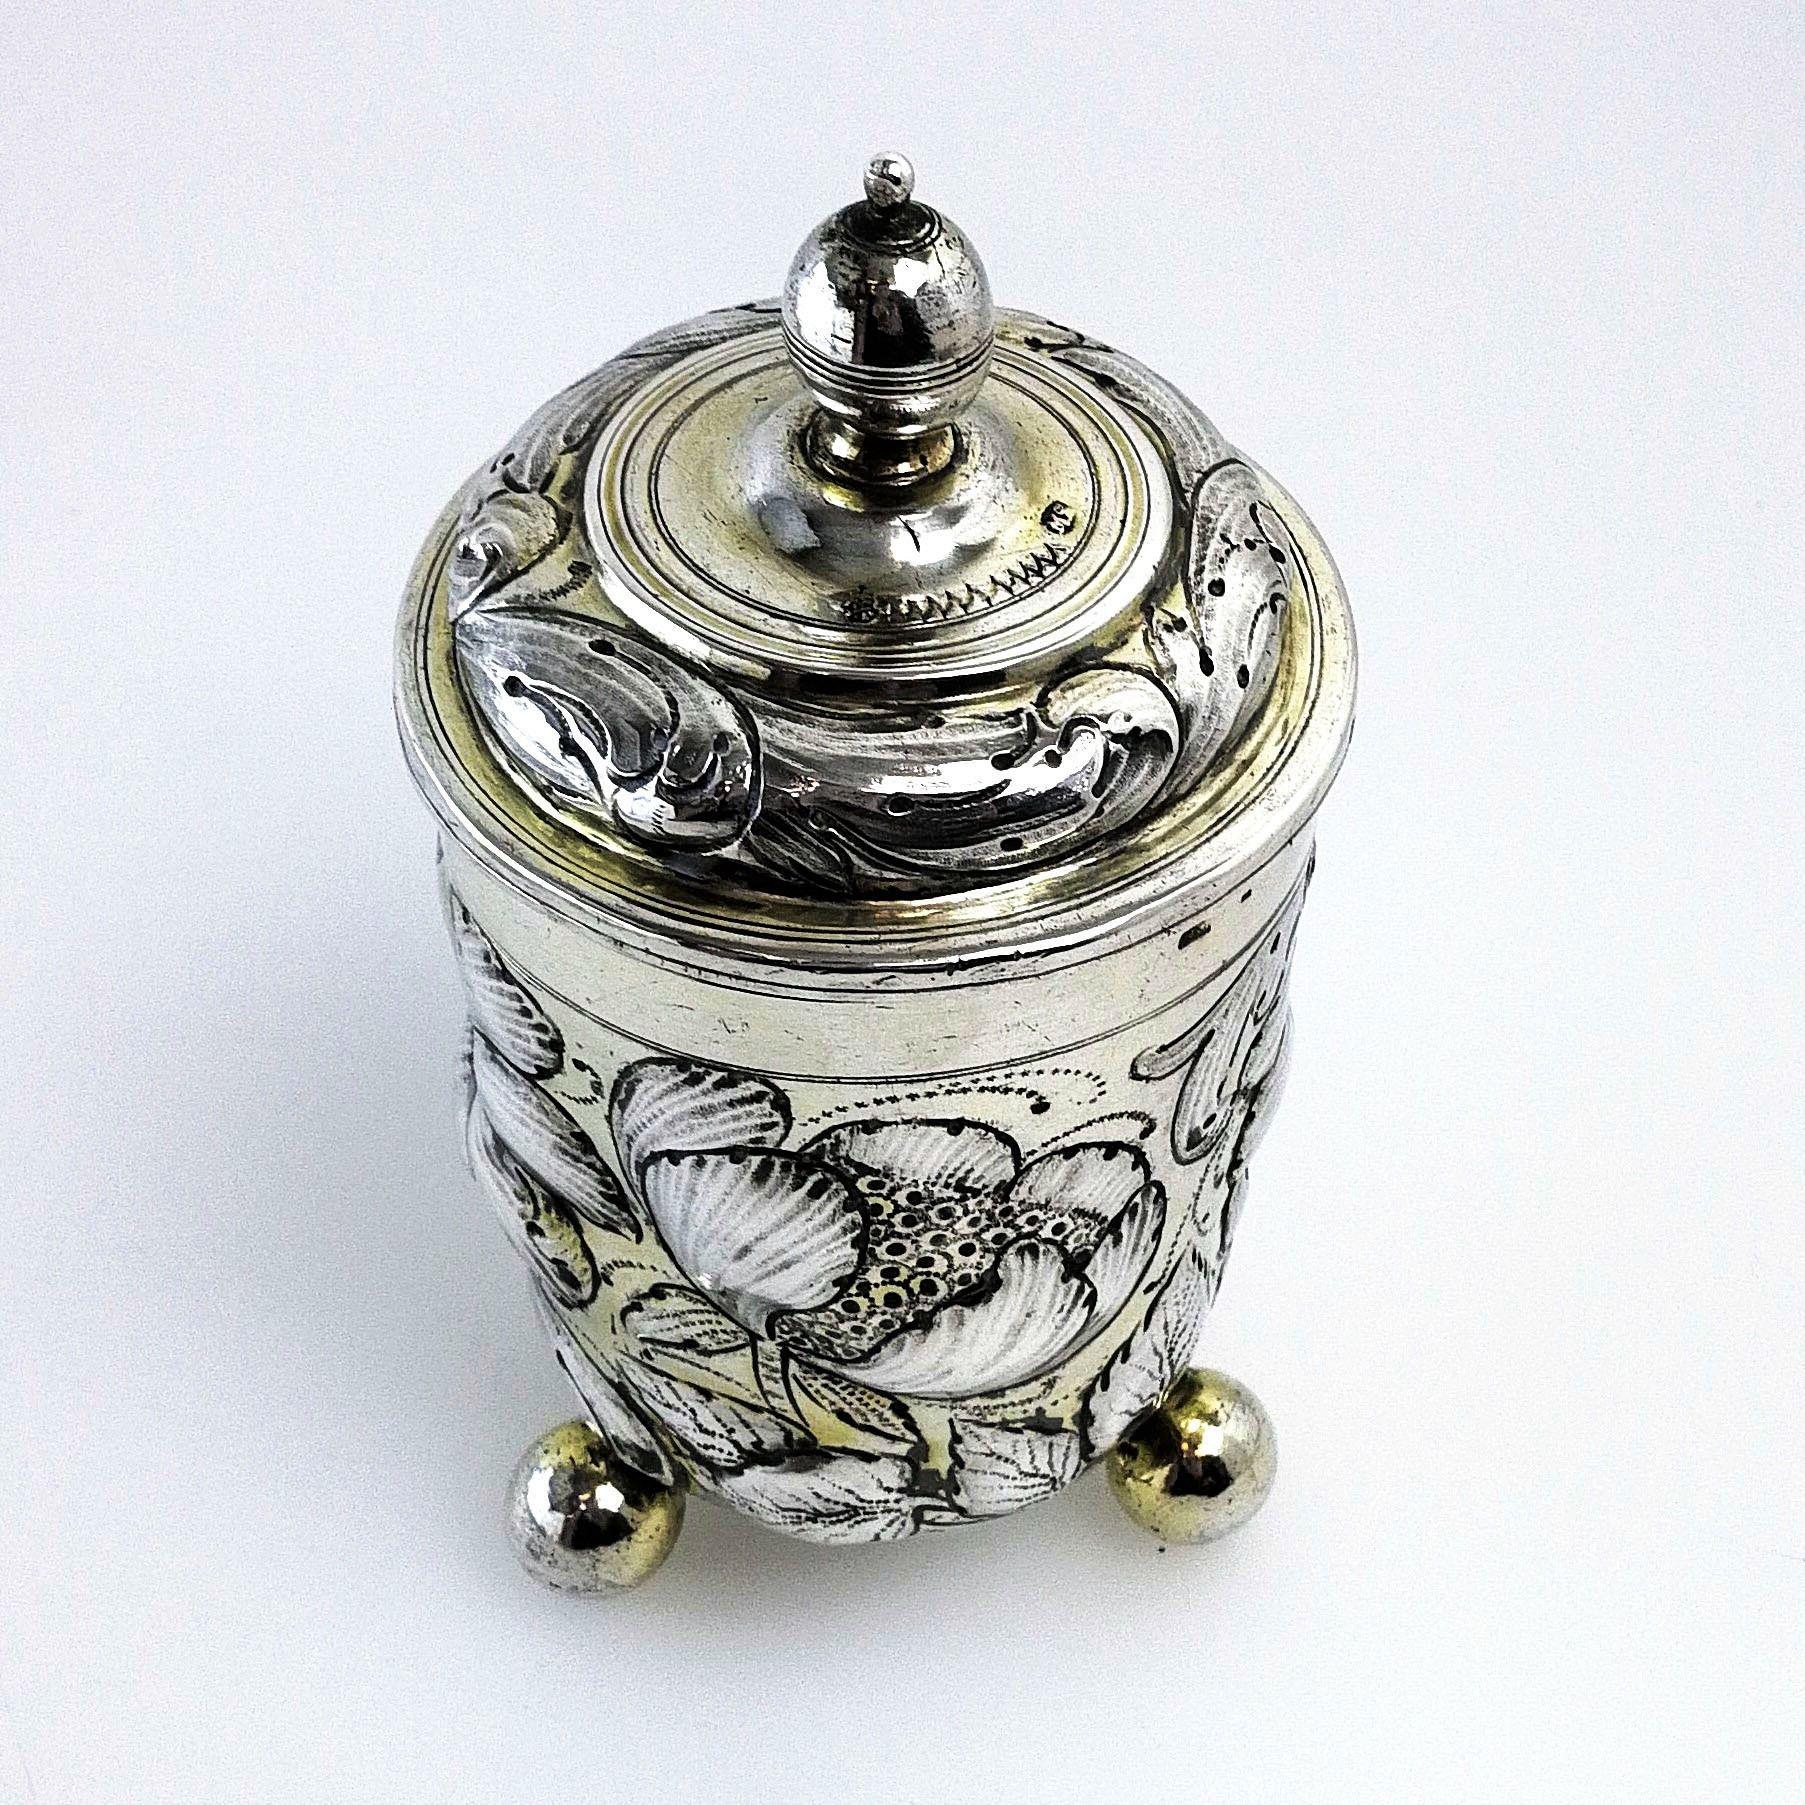 18th Century and Earlier Antique Early German Silver Cup and Cover / Lidded Beaker circa 1680 Augsburg